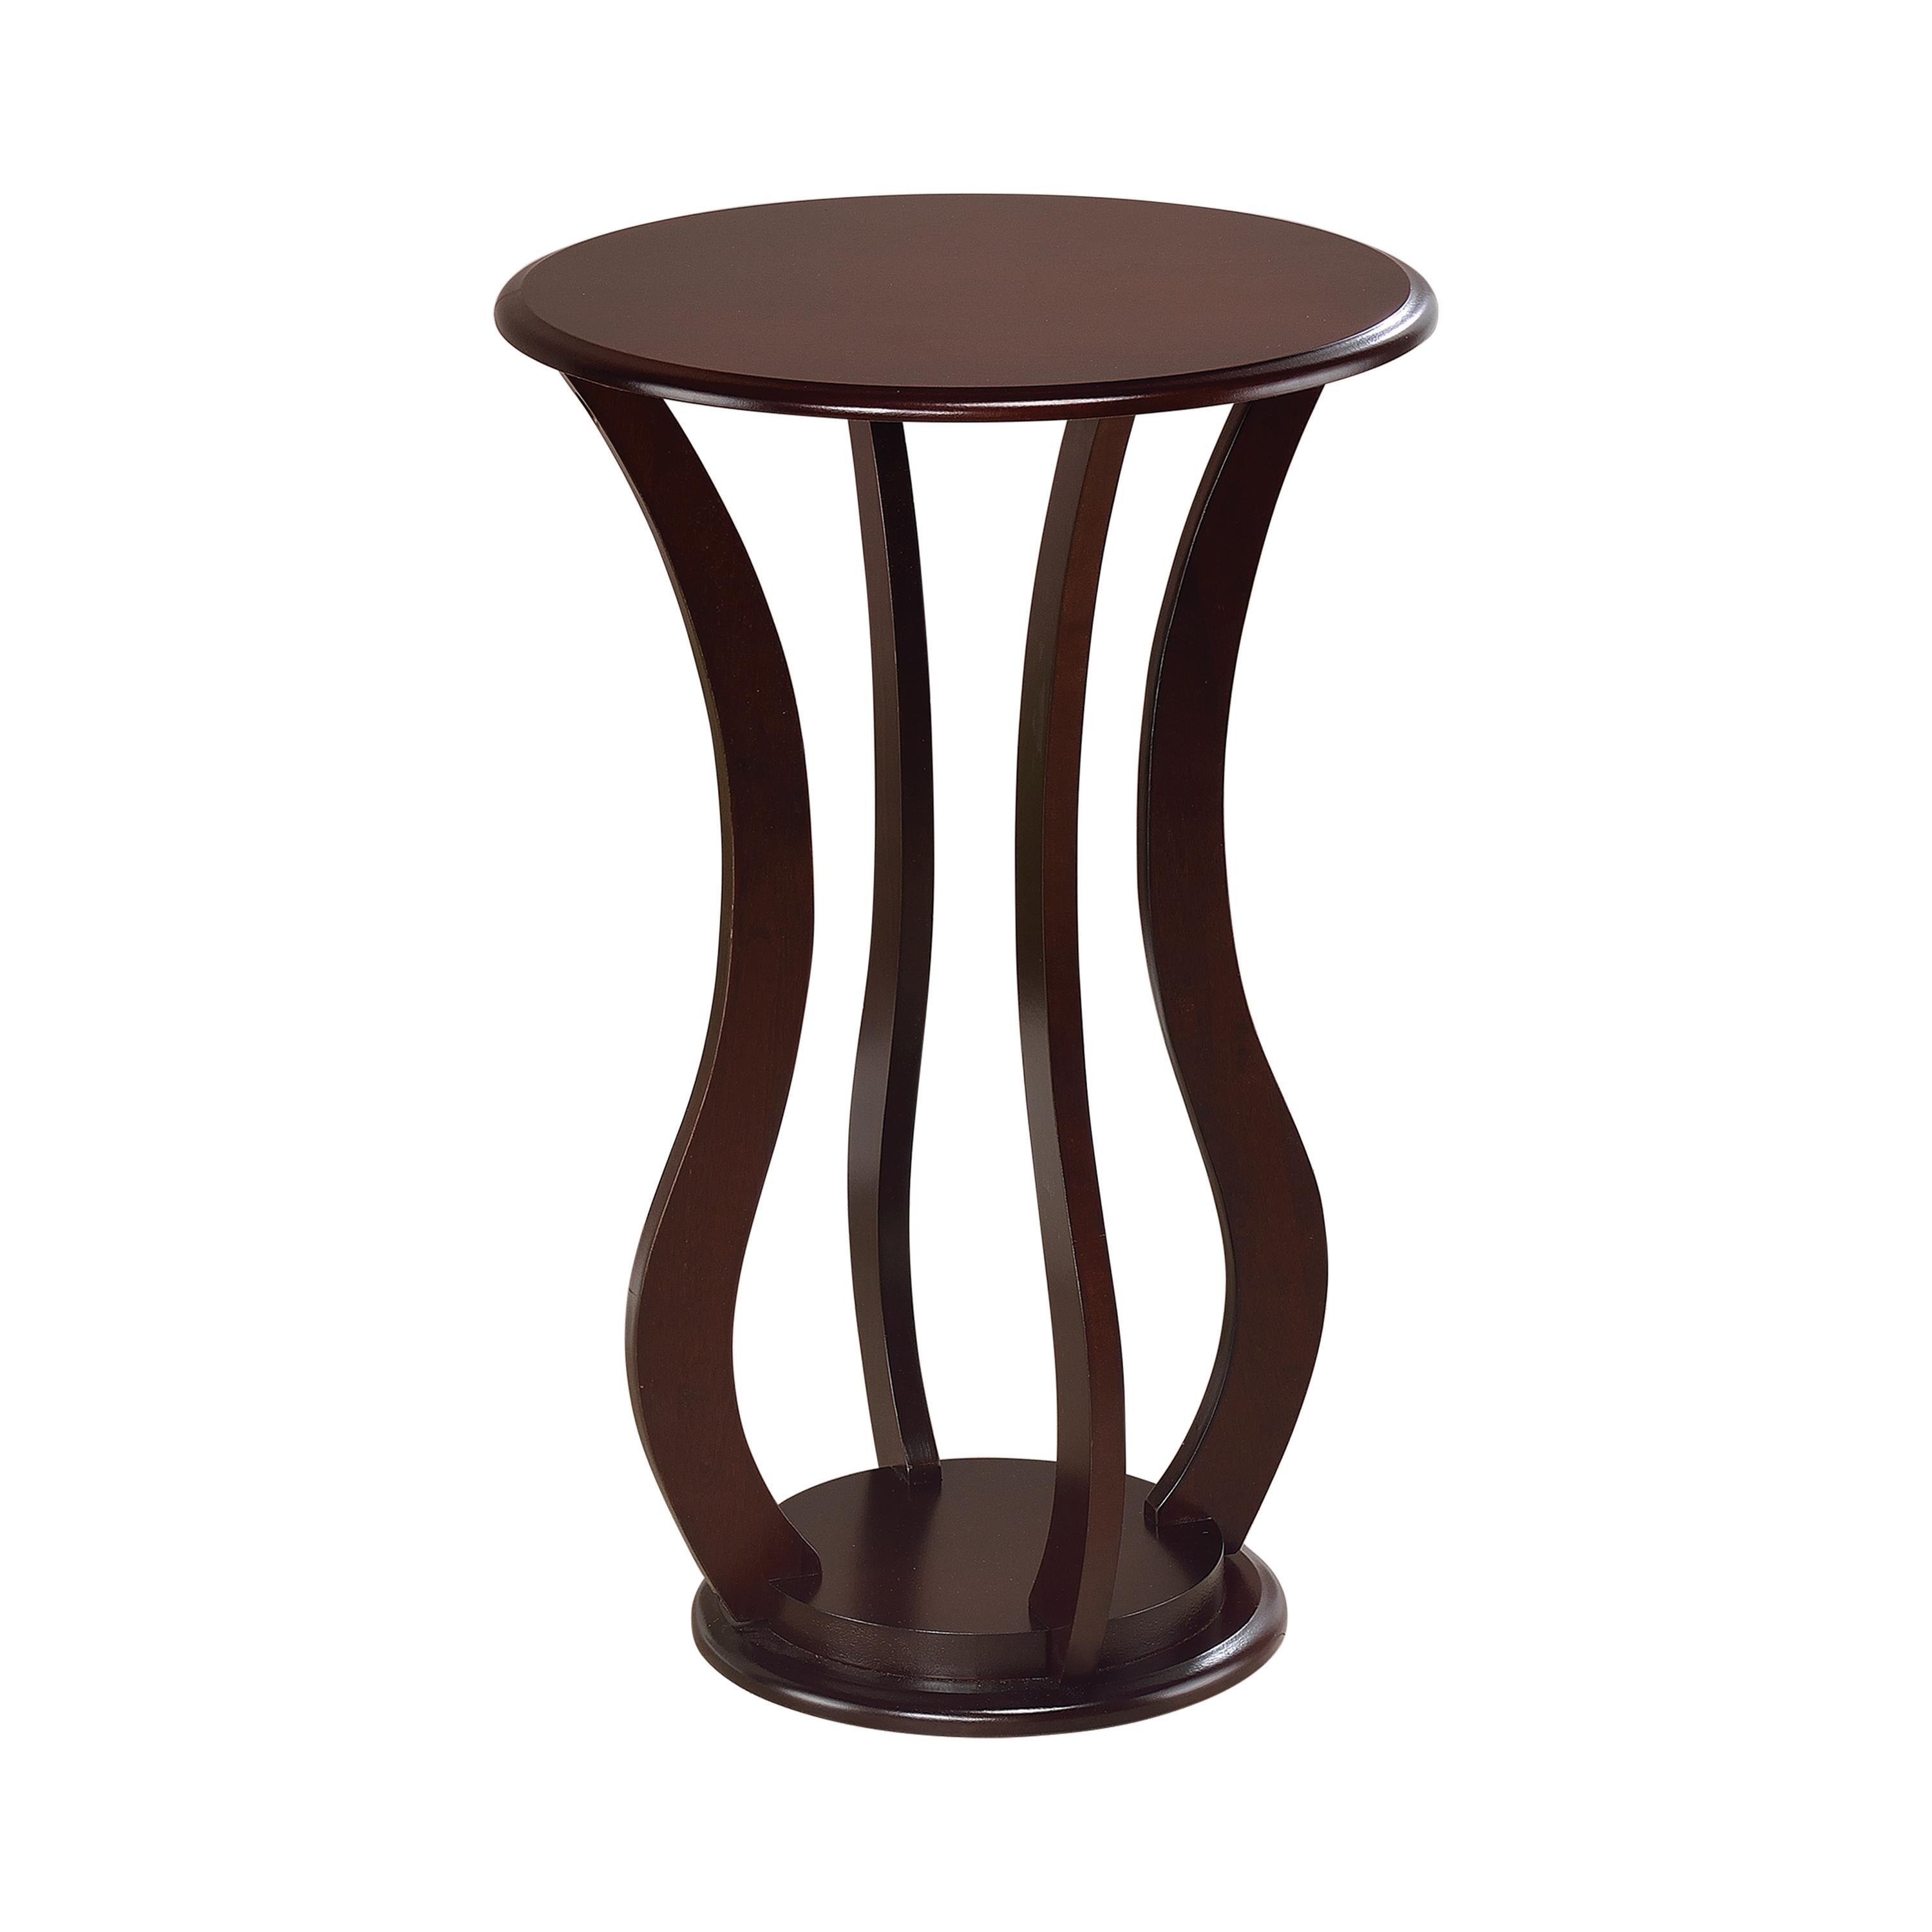 Transitional Accent Table 900934 900934 in Cherry 